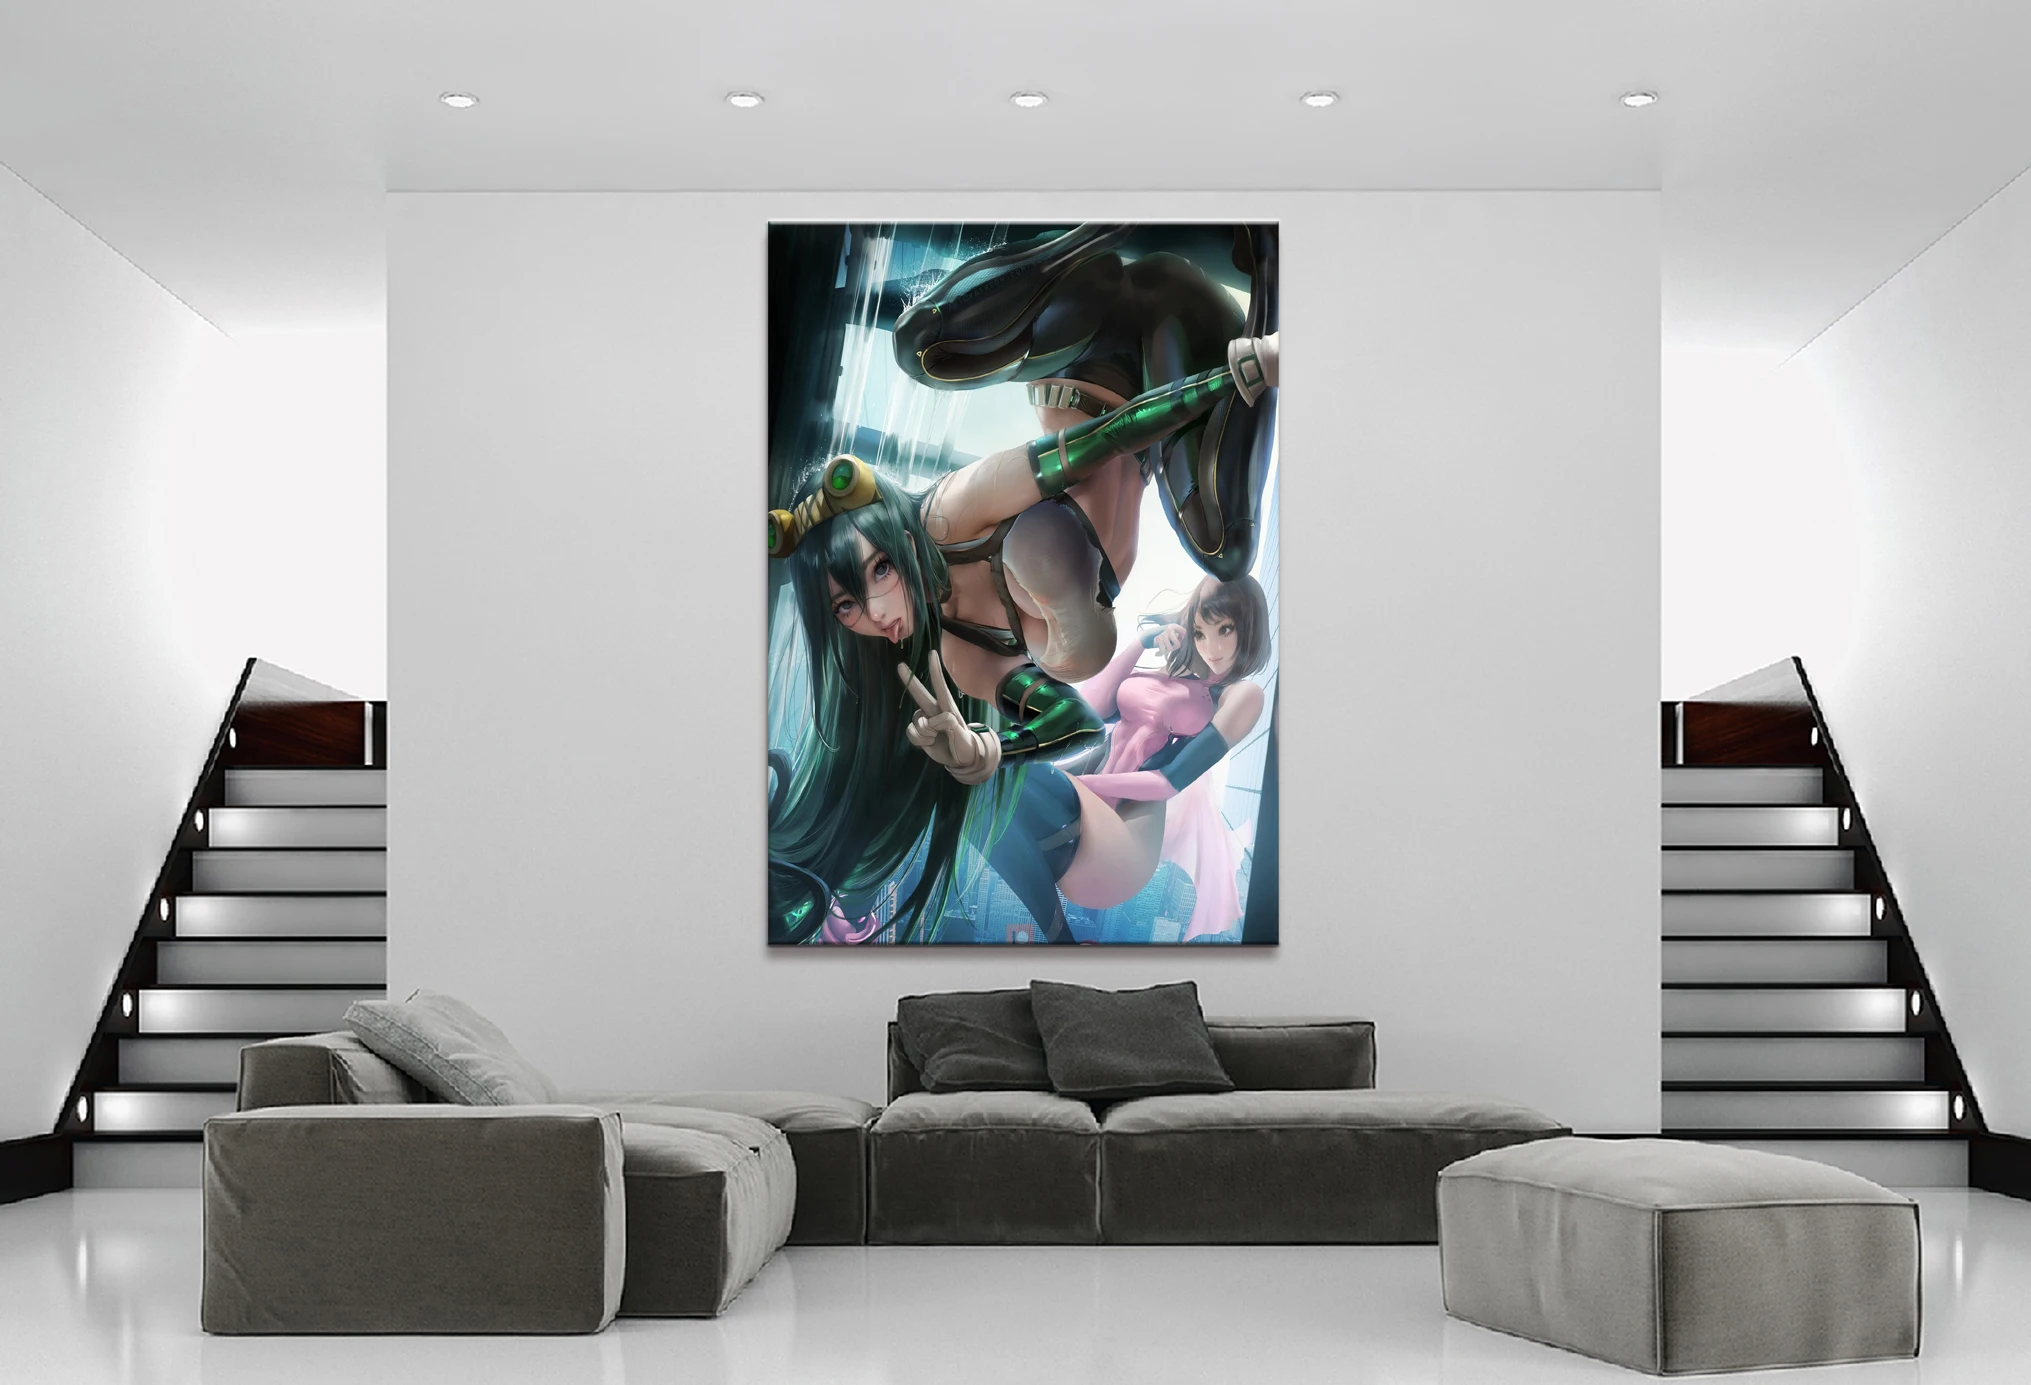 Home Decor Canvas 1 Piece Cute Sexy Anime My Hero Academia Asui Tsuyu Posters and Prints Painting Home Decoration Wall Pictures